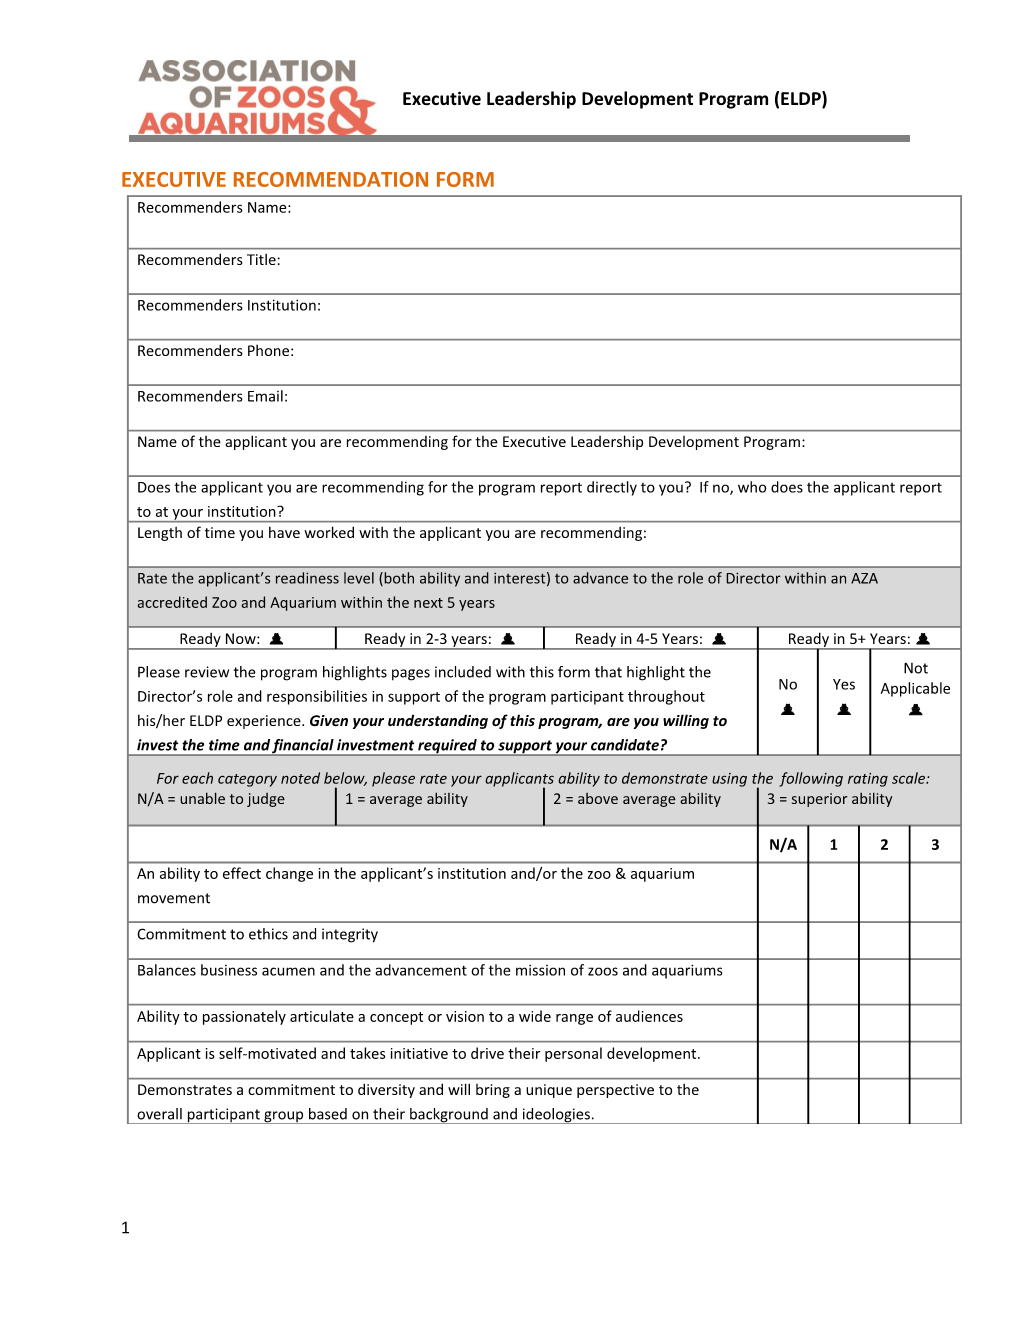 Executive Recommendation Form Continued